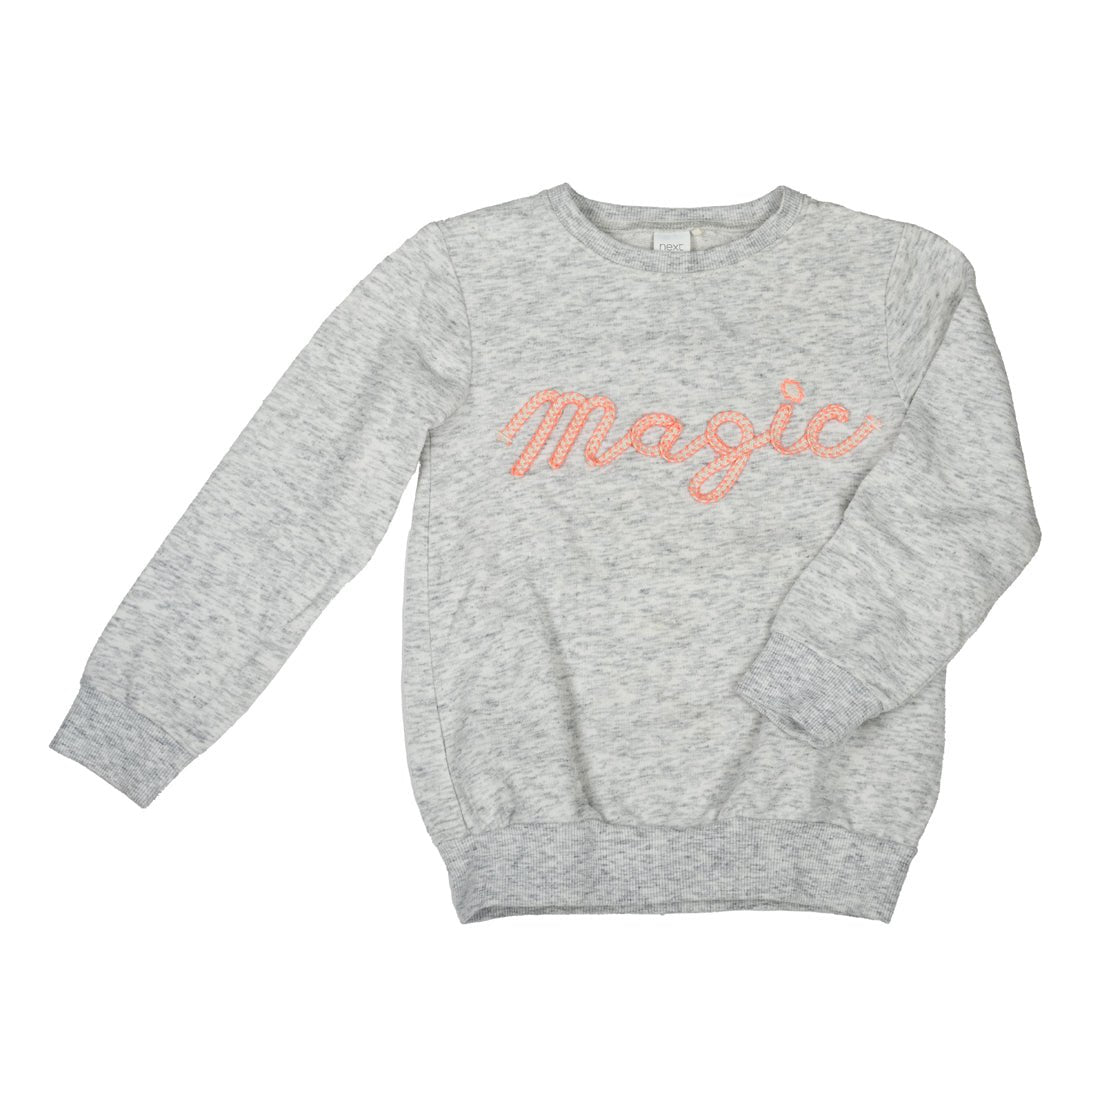 Next Magic Pullover For Girls - mymadstore.com